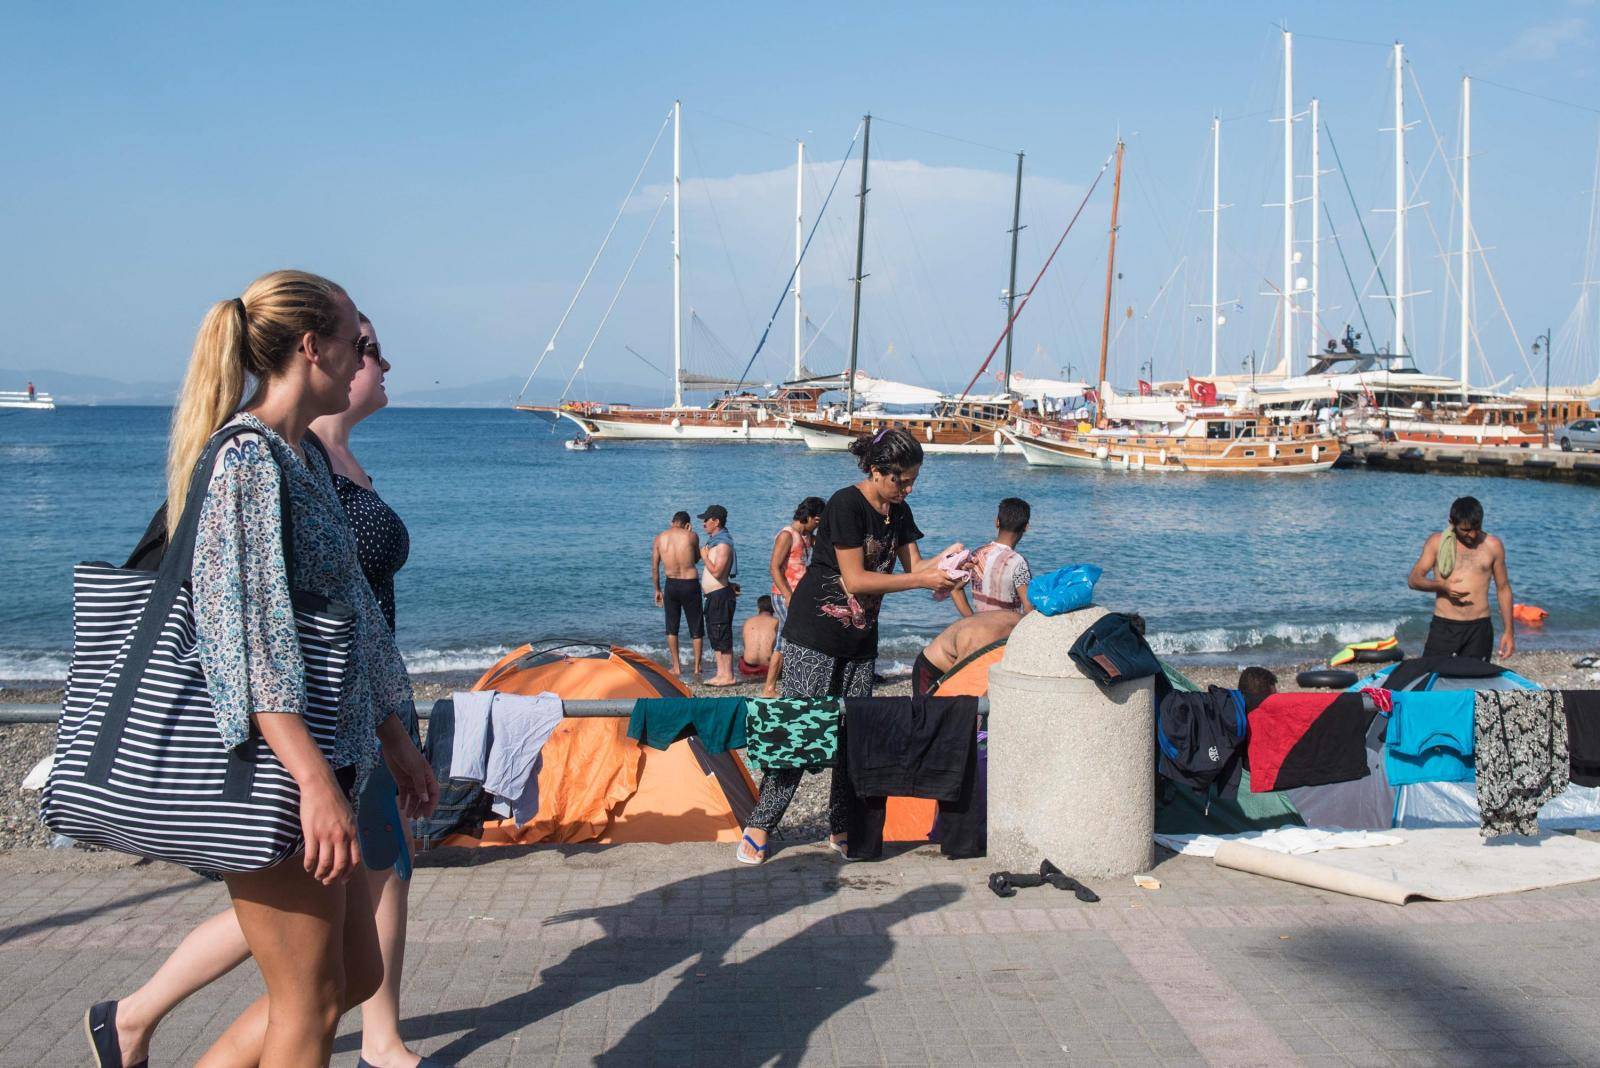 [Feature] GREECE, THE ISLAND OF KOS BETWEEN TOURISM AND IMMIGRATION